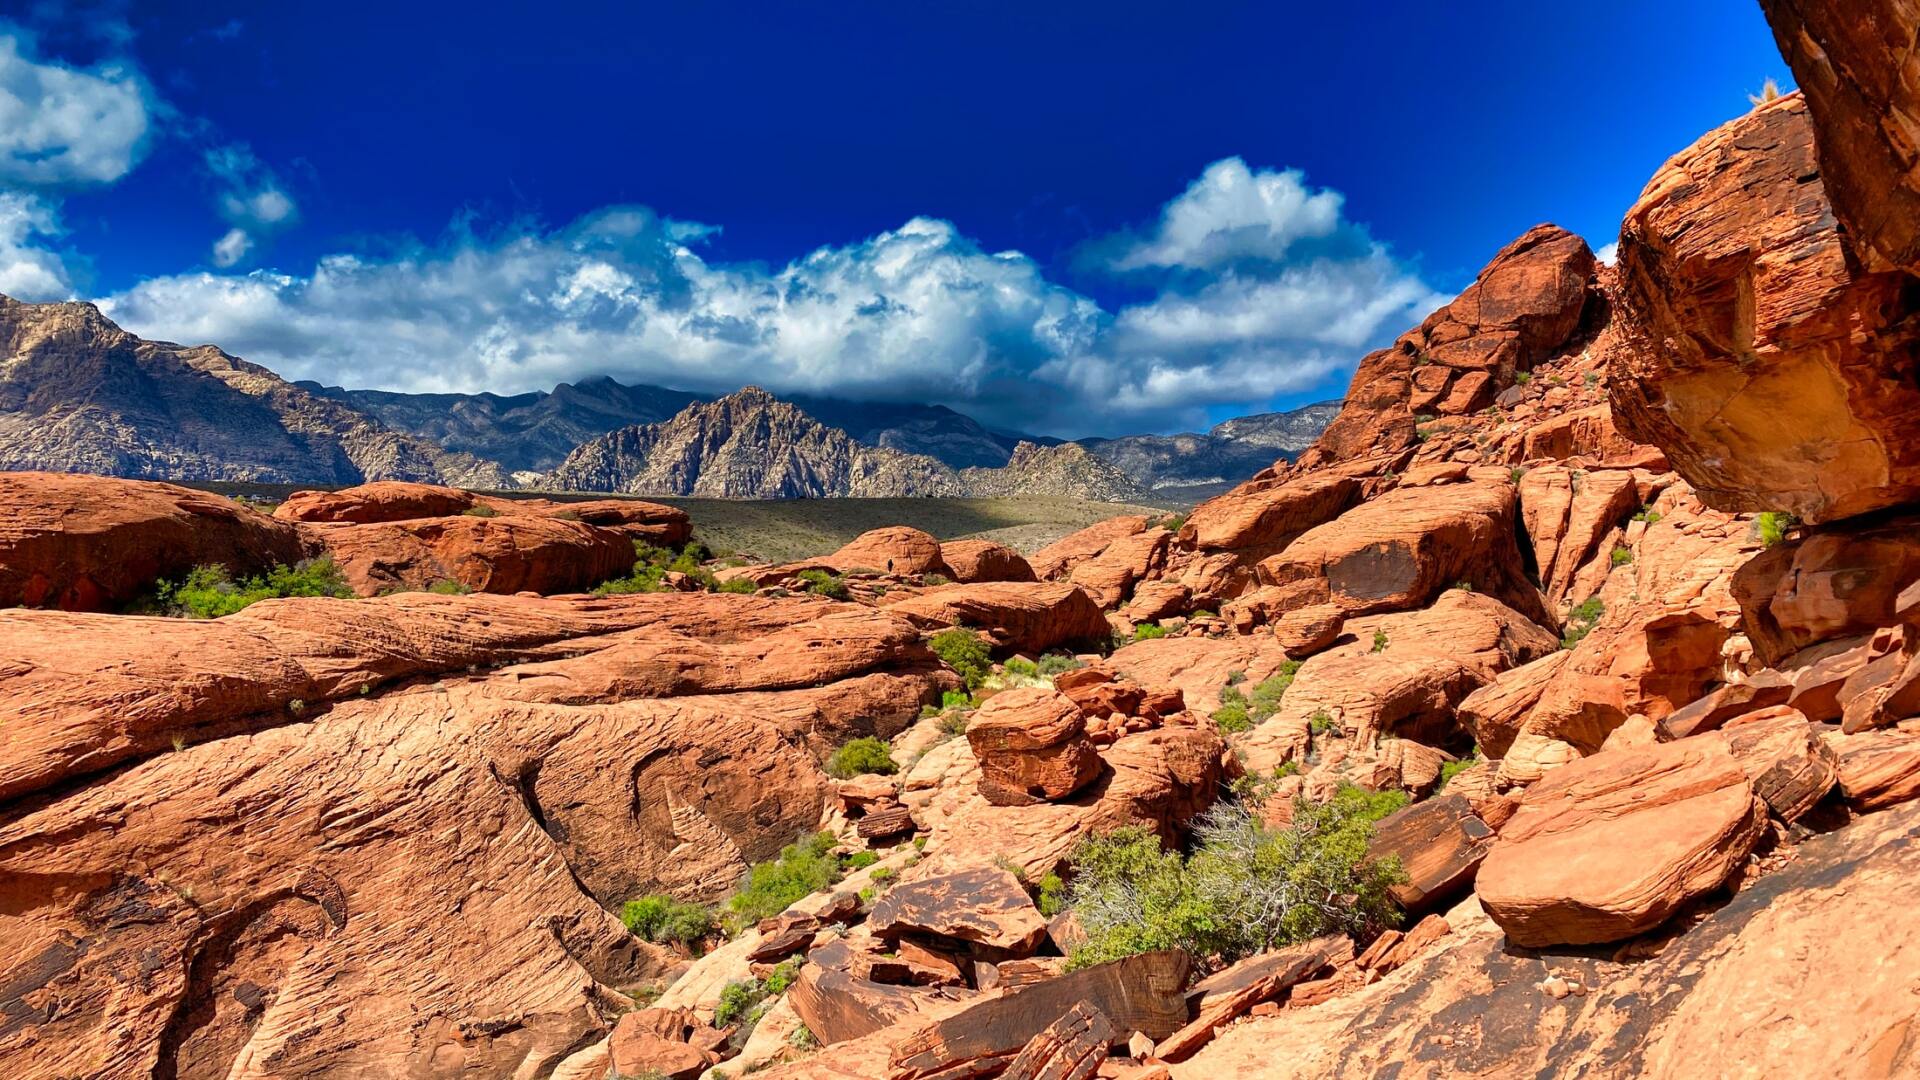 view of Red Rock canyon with mountains and clouds in background